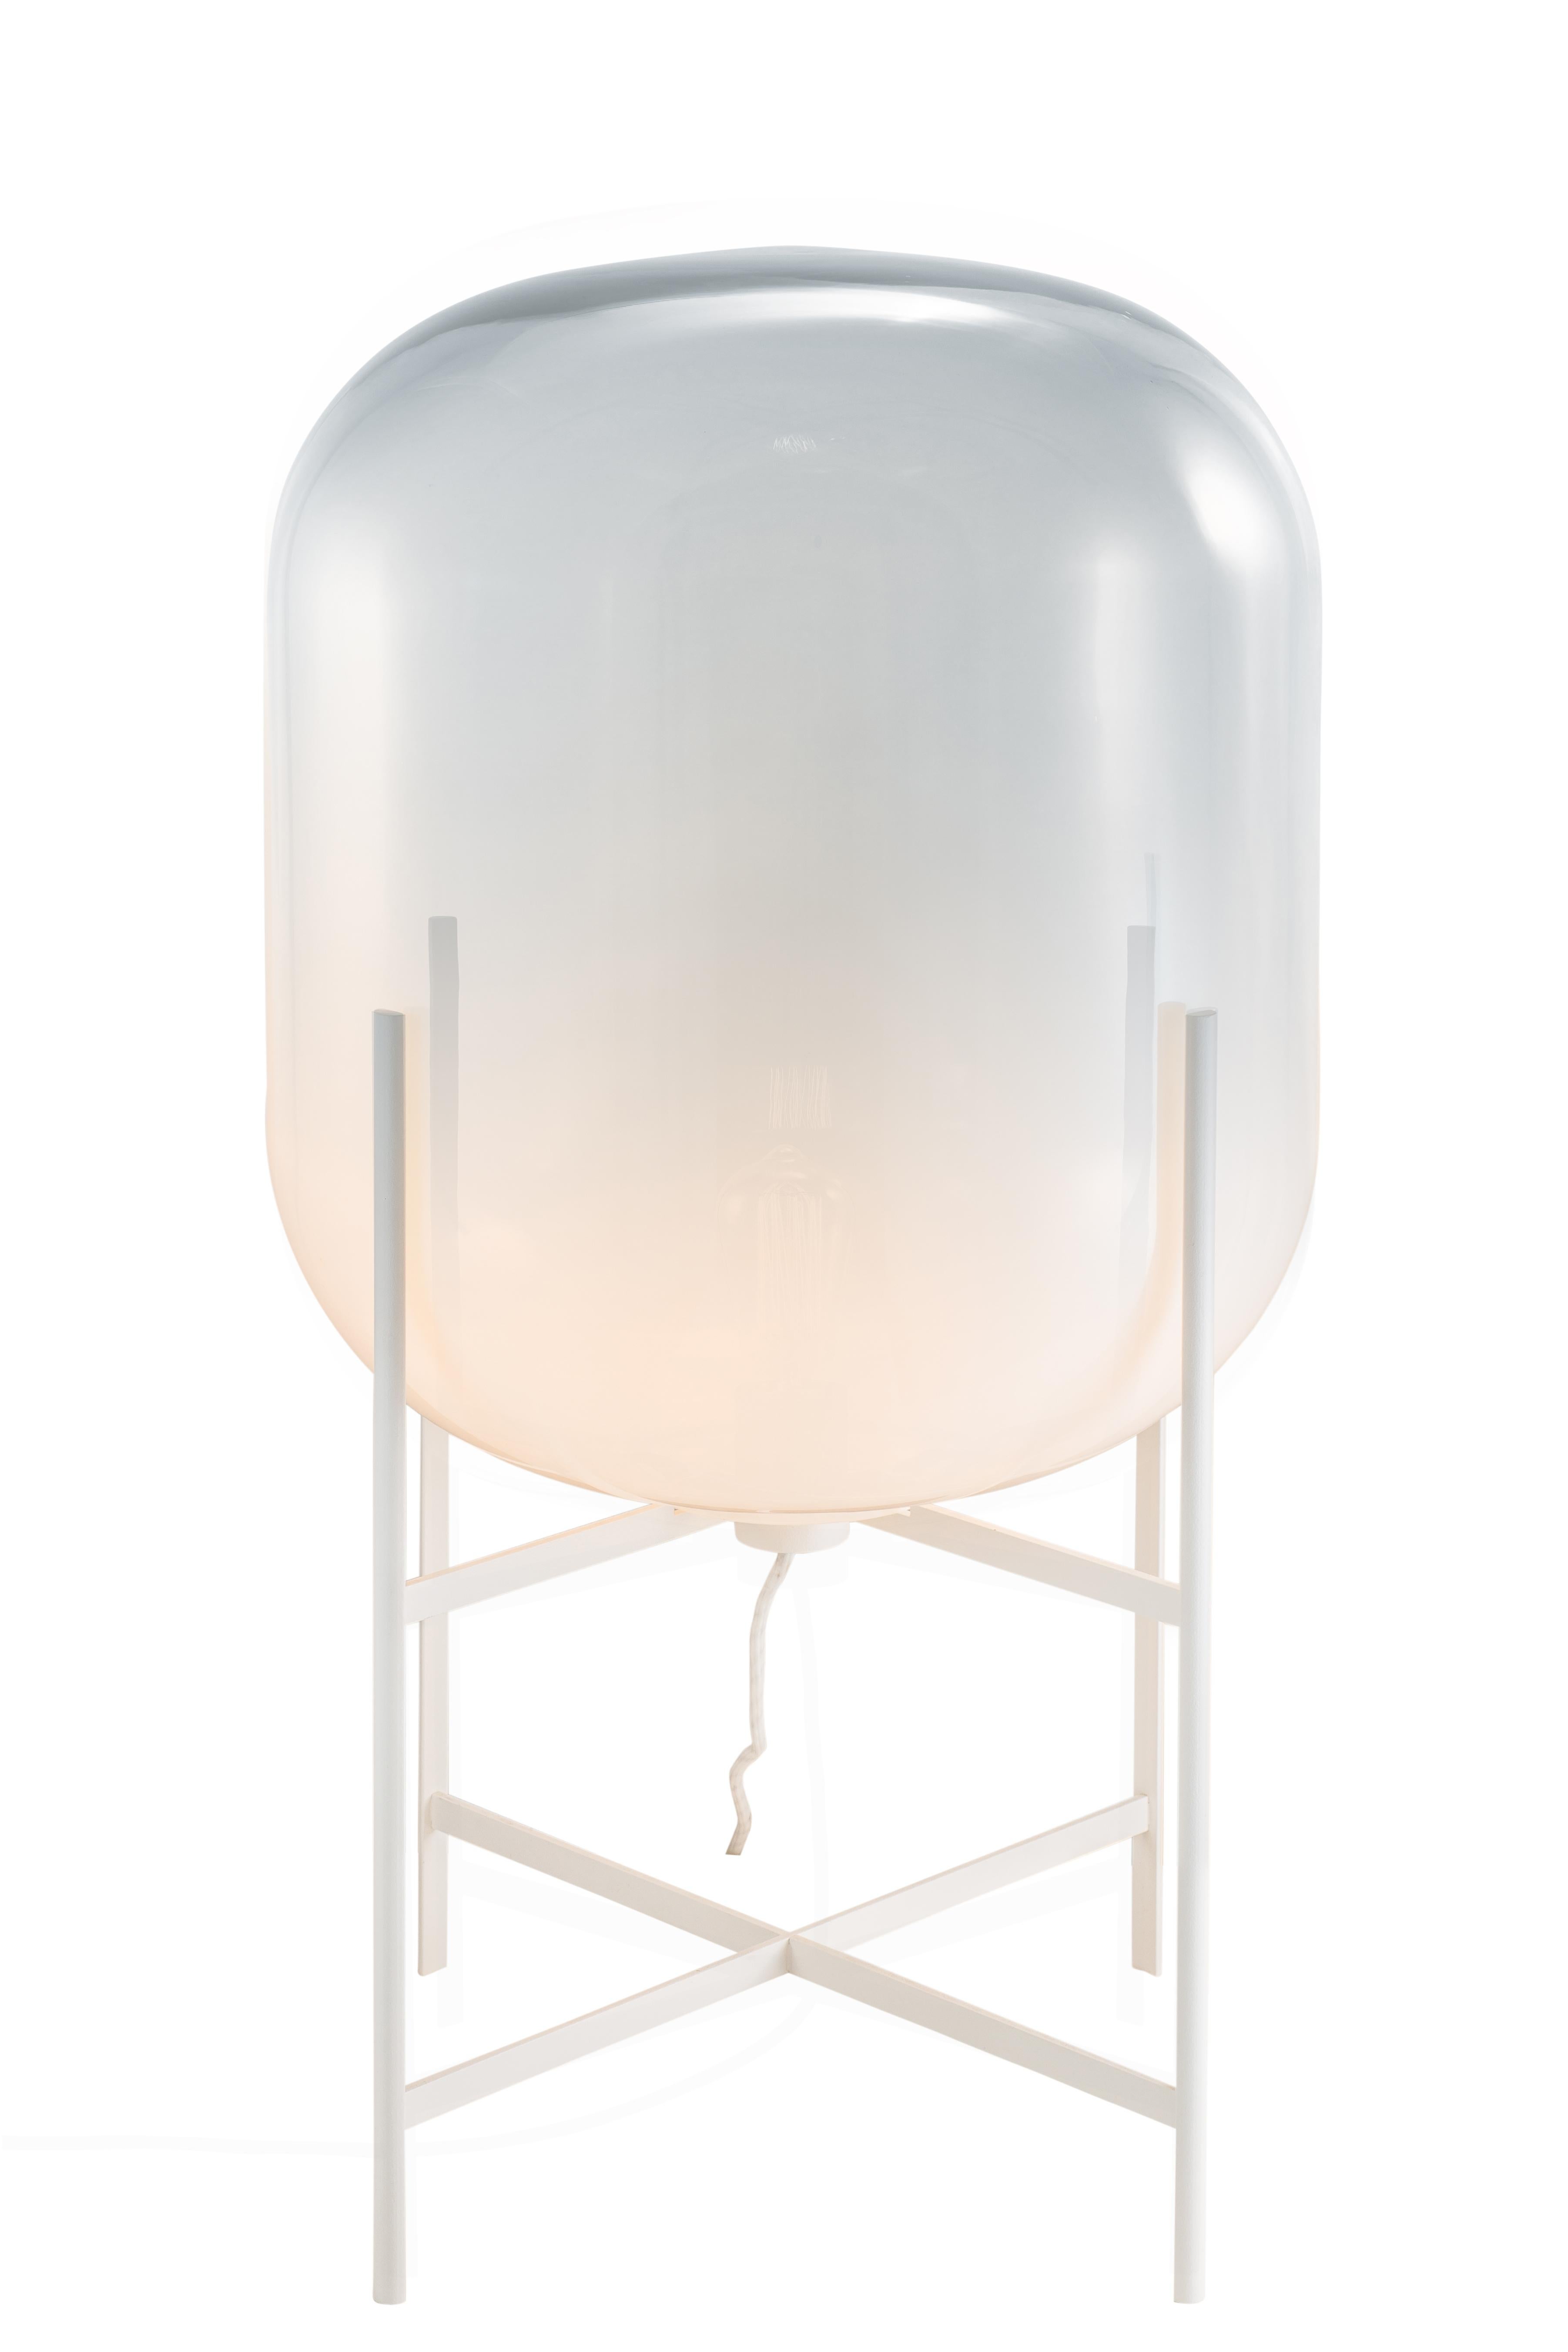 Oda Medium Moonlight White Floor Lamp by Pulpo
Dimensions: D45 x H80 cm
Materials: handblown glass coloured and steel.

Also available in different finishes. Please contact us.

A slender base hugs a bulbous form. An industrial motif softened by the